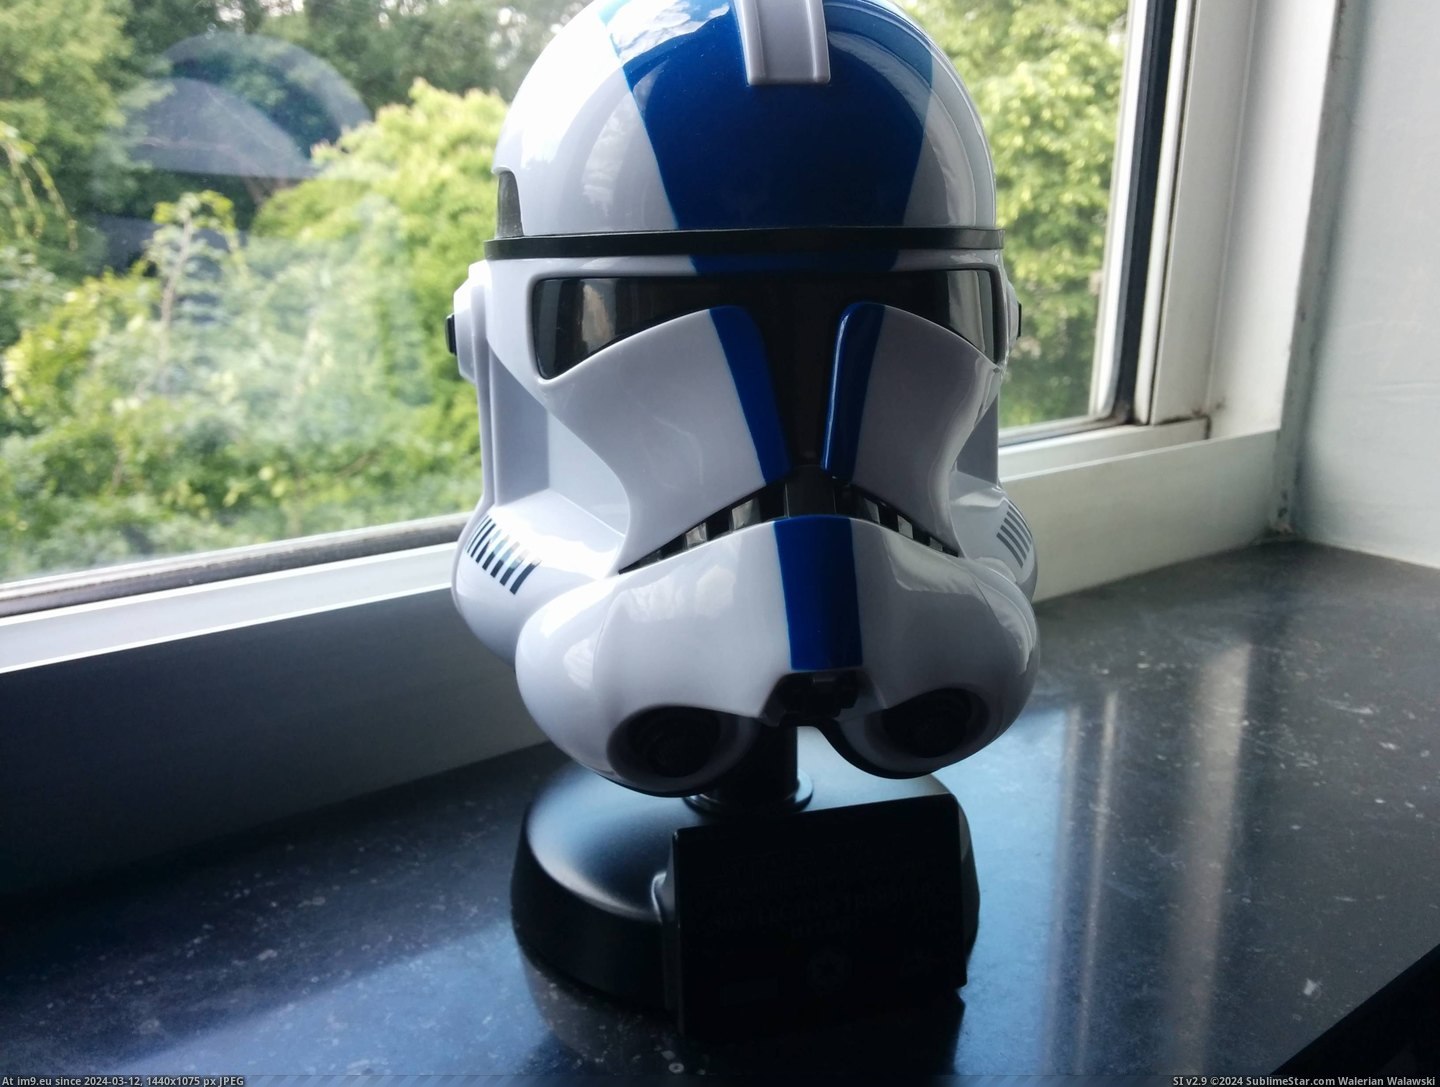 #Replica #Helmet #501st #Accurate [Mildlyinteresting] Today I found out even the inside of my 501st helmet replica is accurate. 1 Pic. (Obraz z album My r/MILDLYINTERESTING favs))